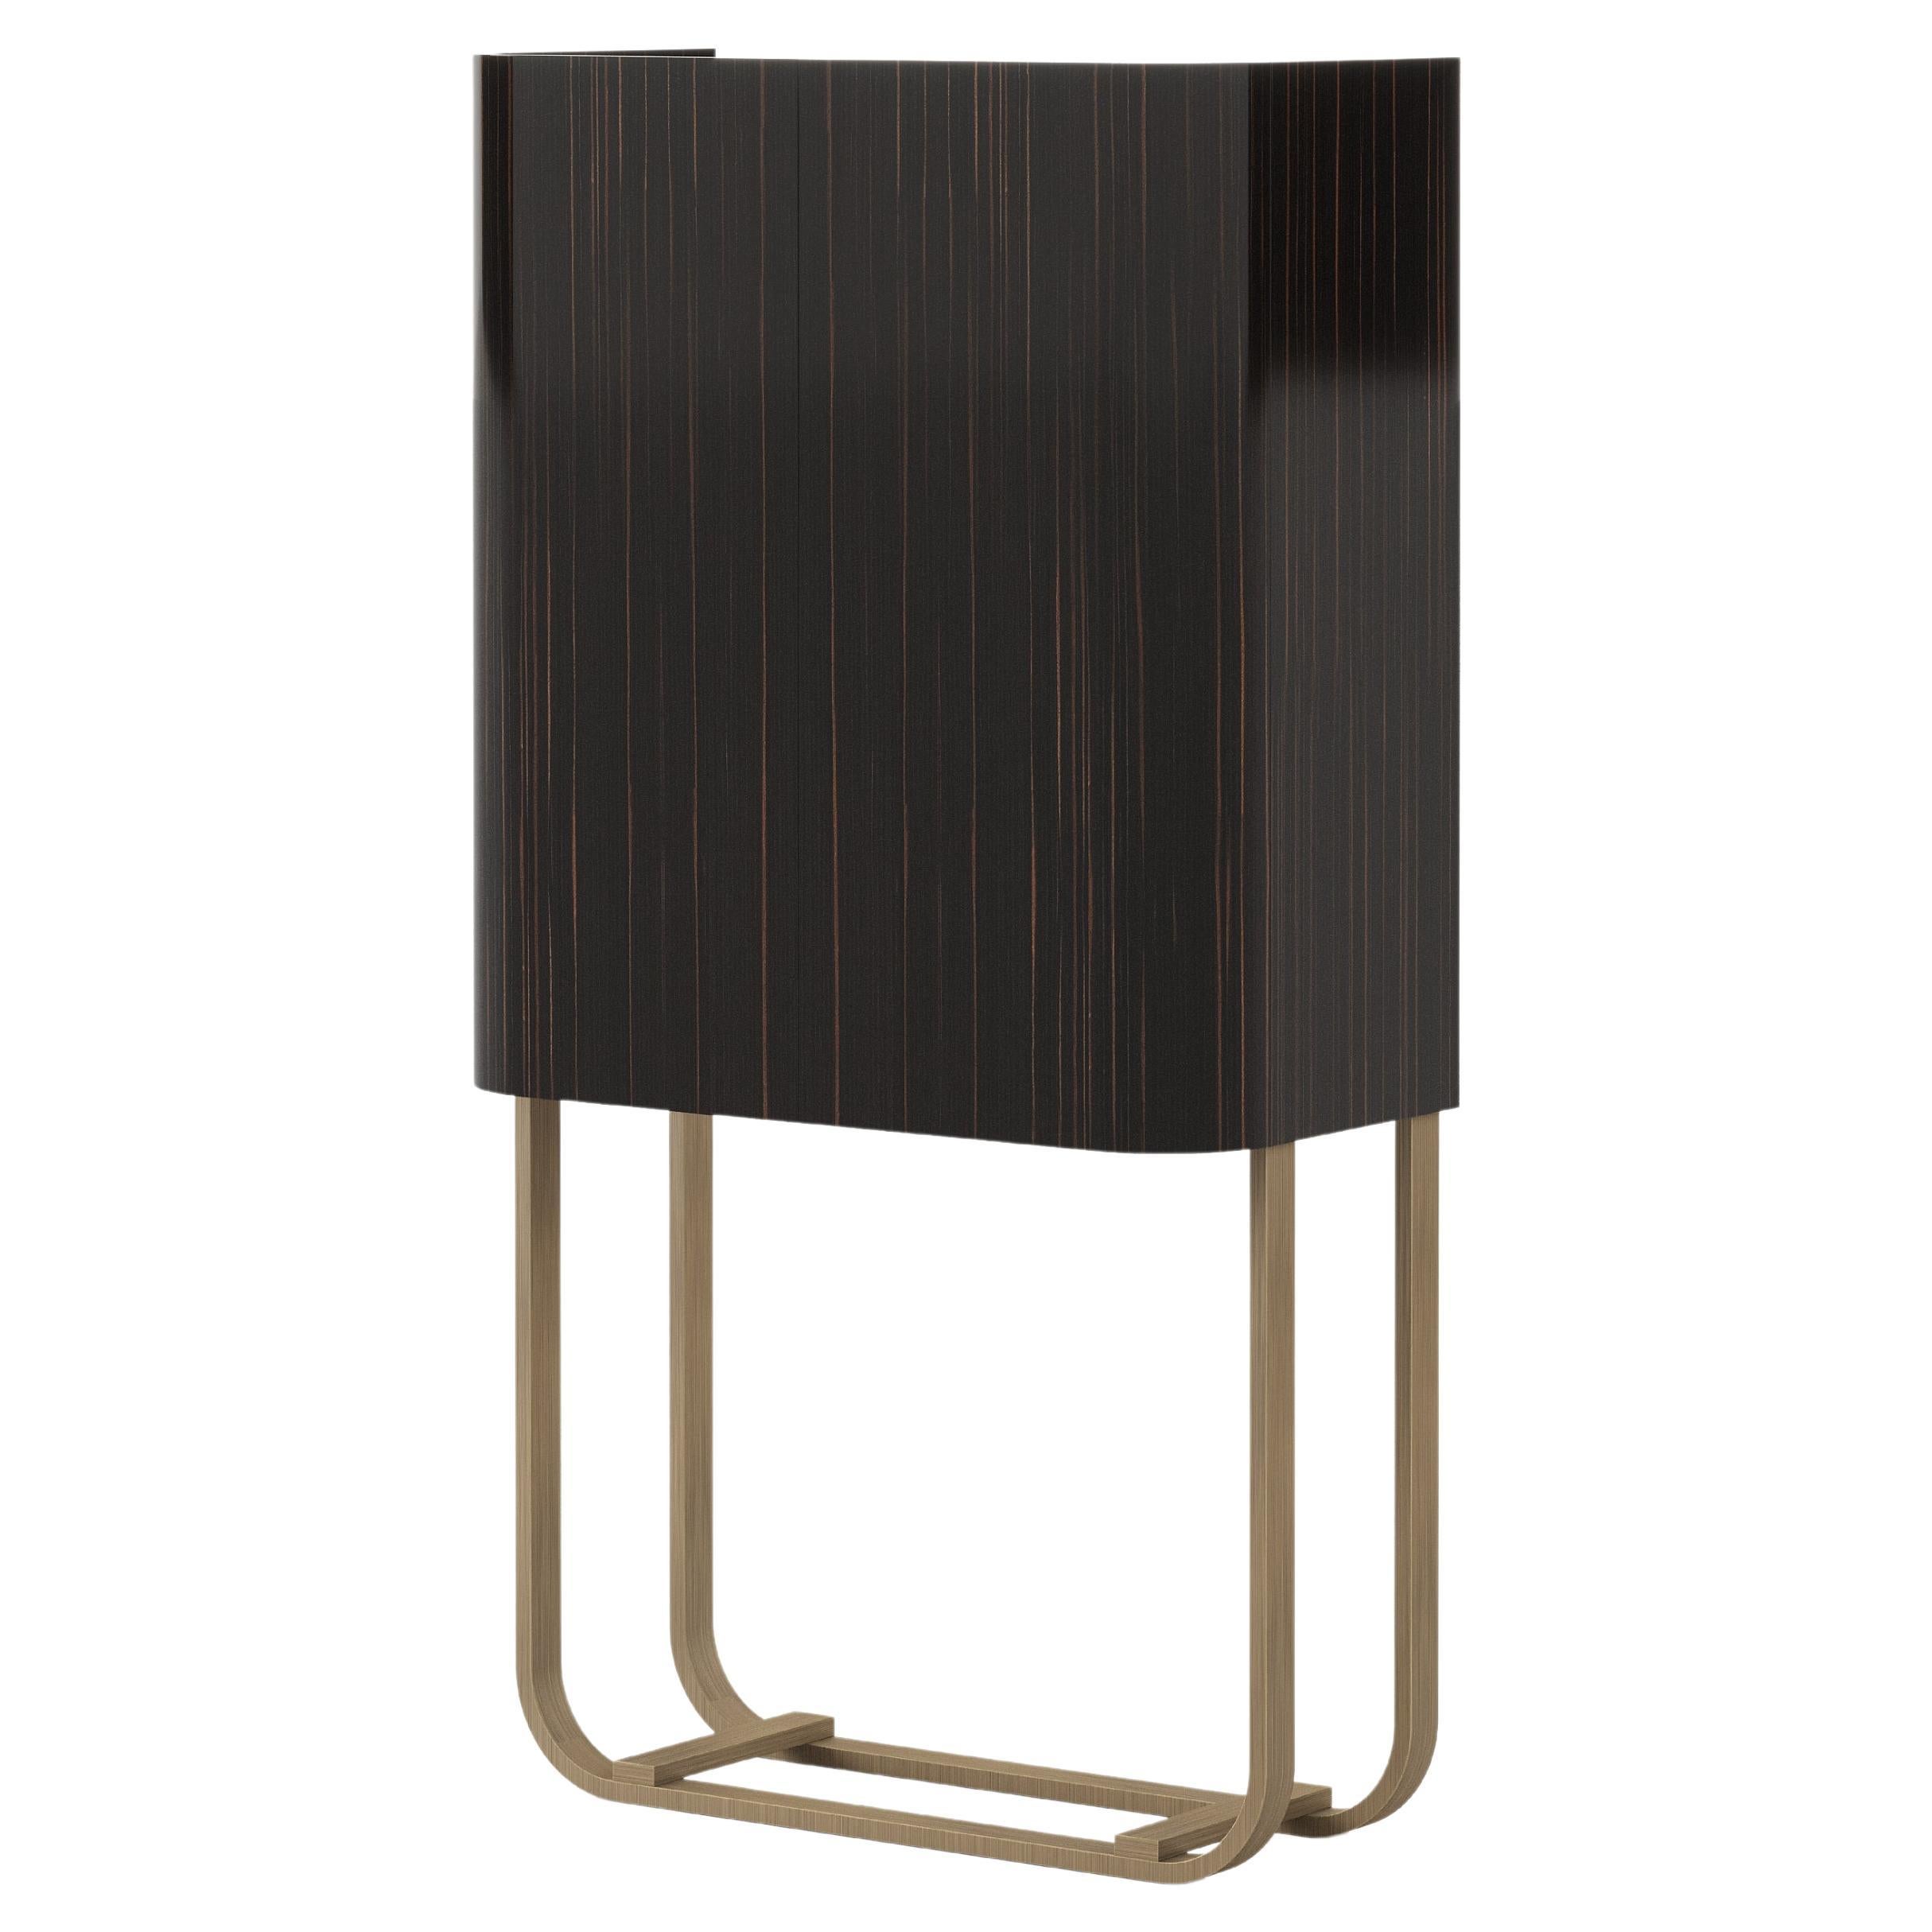 Art Deco His Bar Cabinet Made With Ebony and Brass, Handmade by Stylish Club